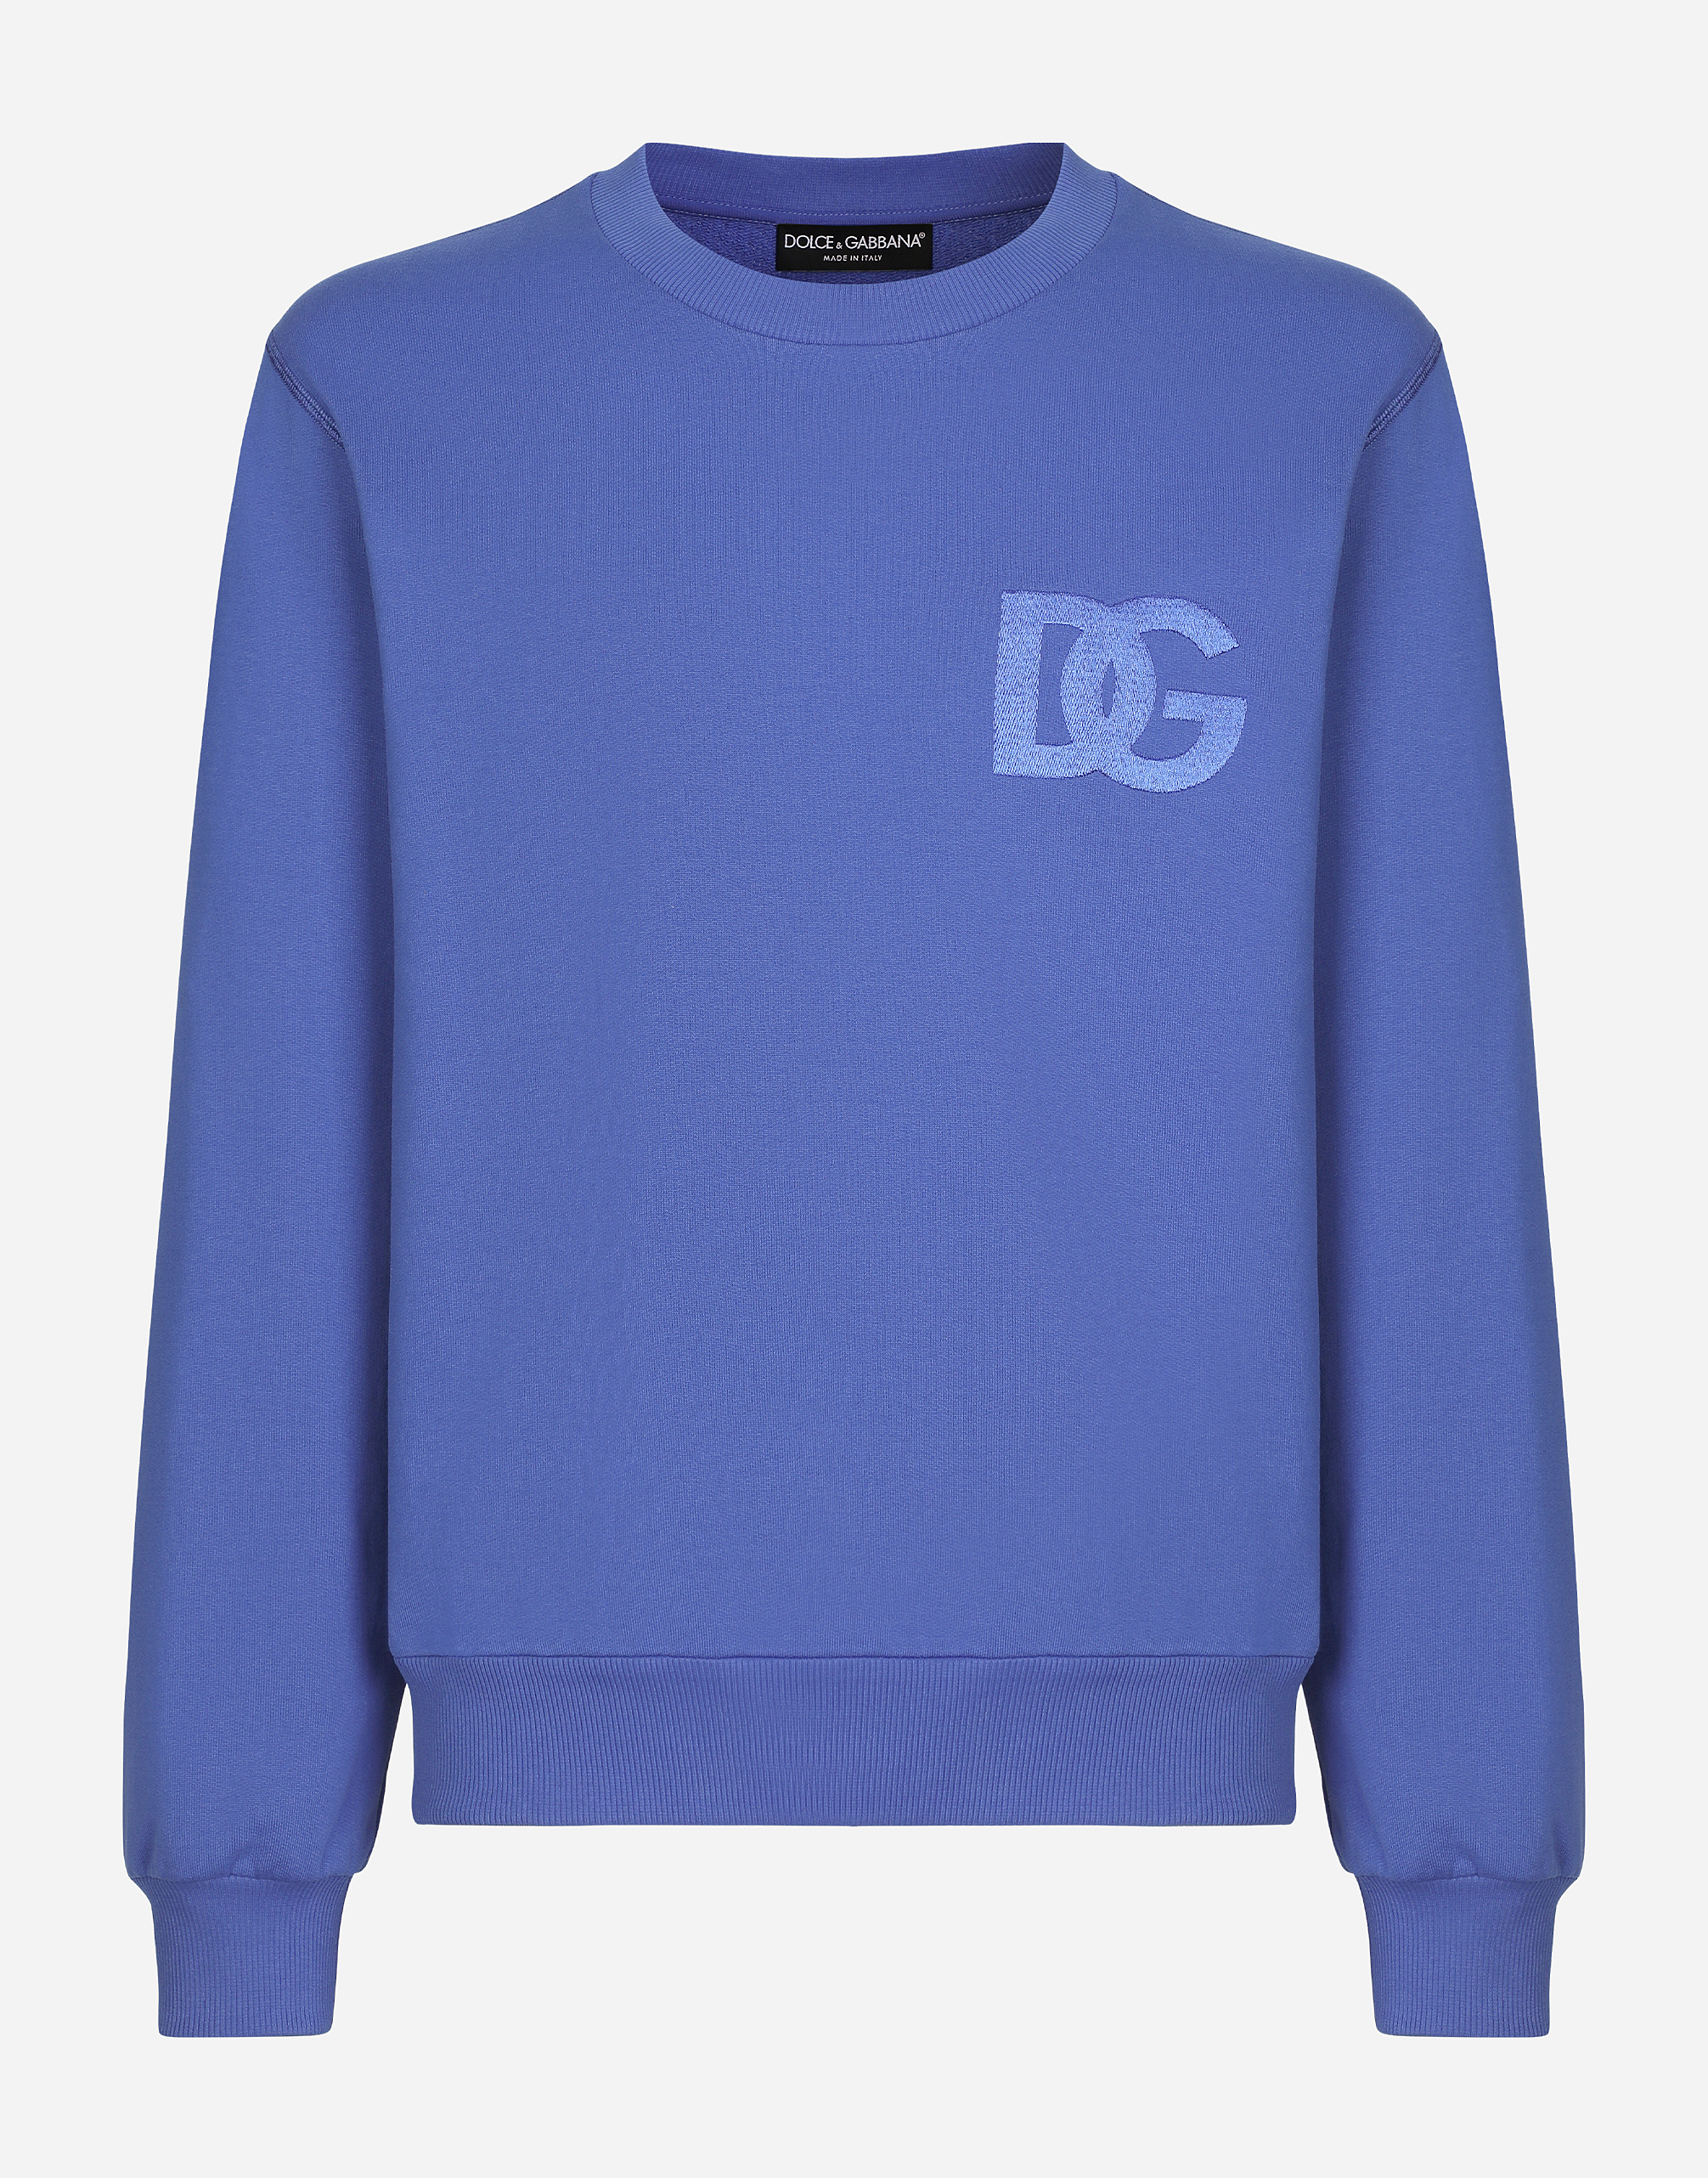 Jersey sweatshirt with DG embroidery in Blue